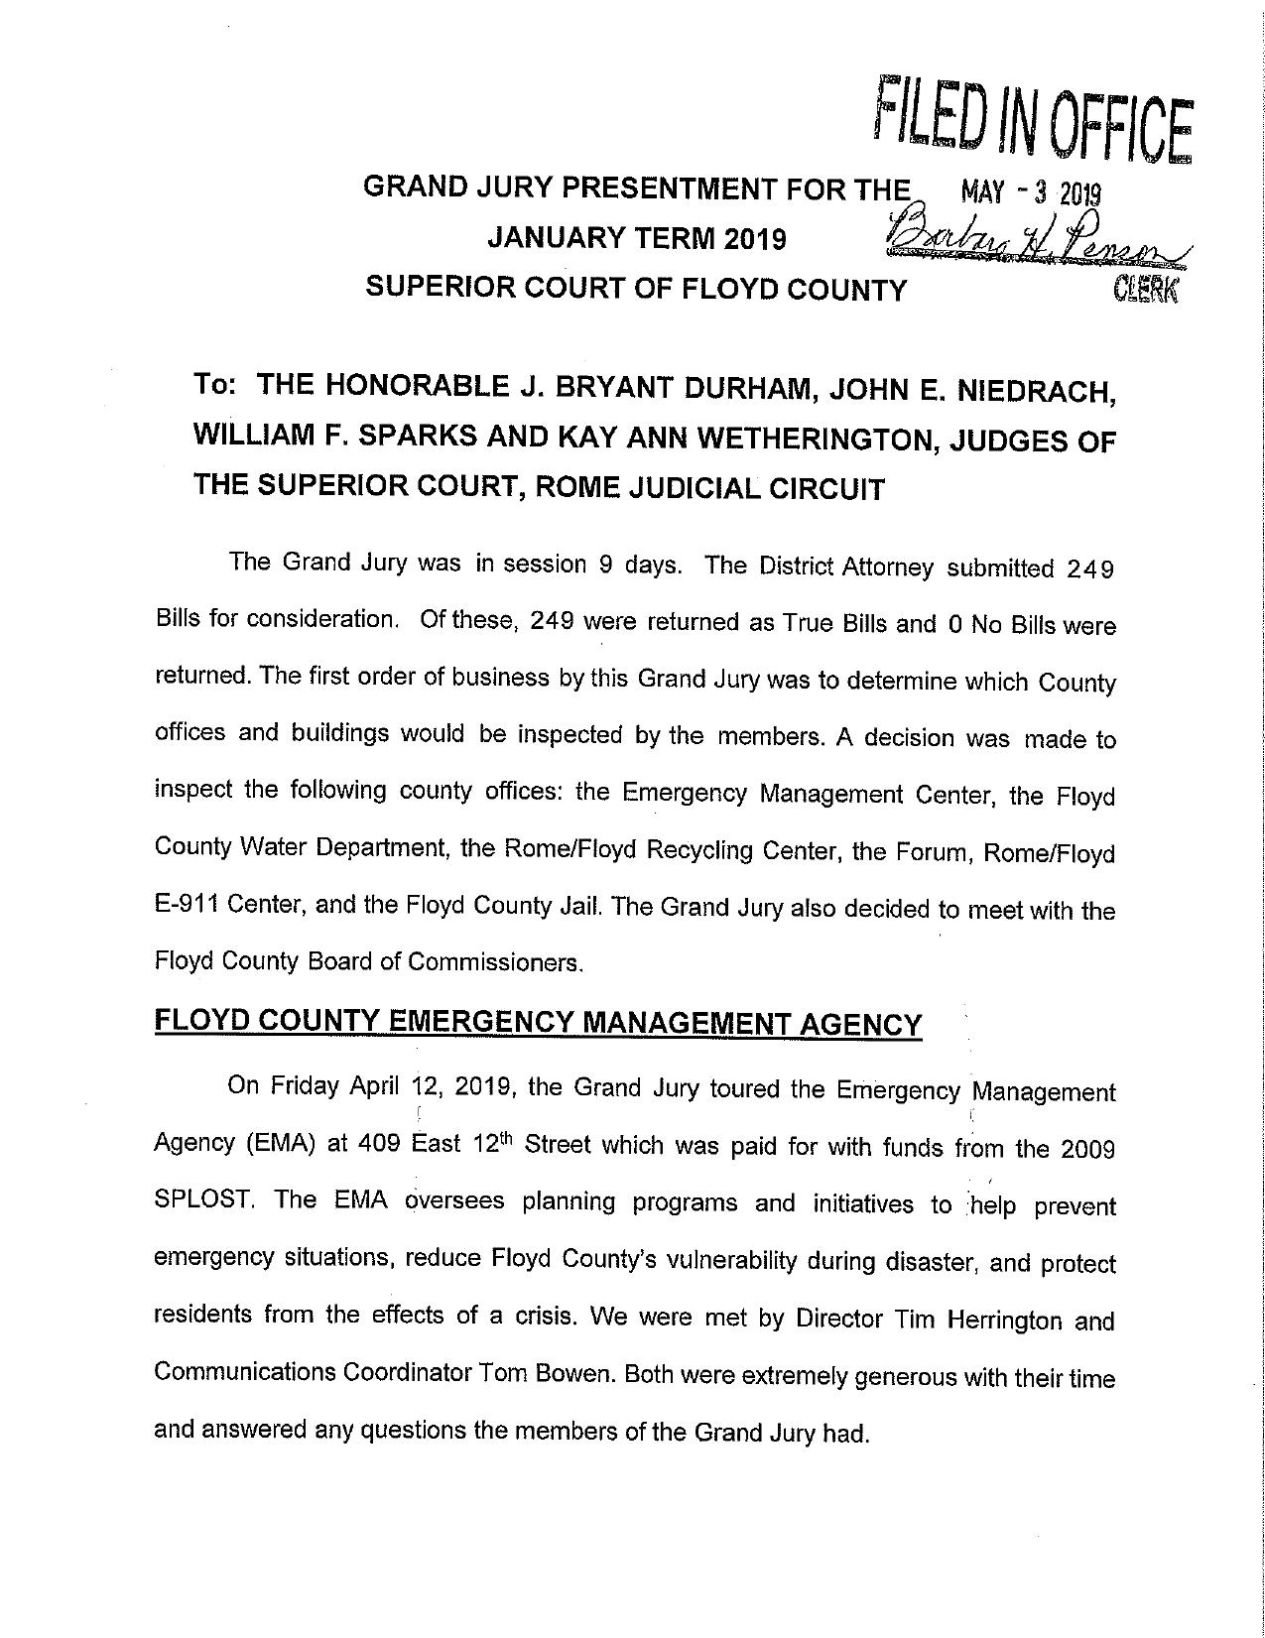 Floyd County Superior Court Grand Jury presentment for the January 2019